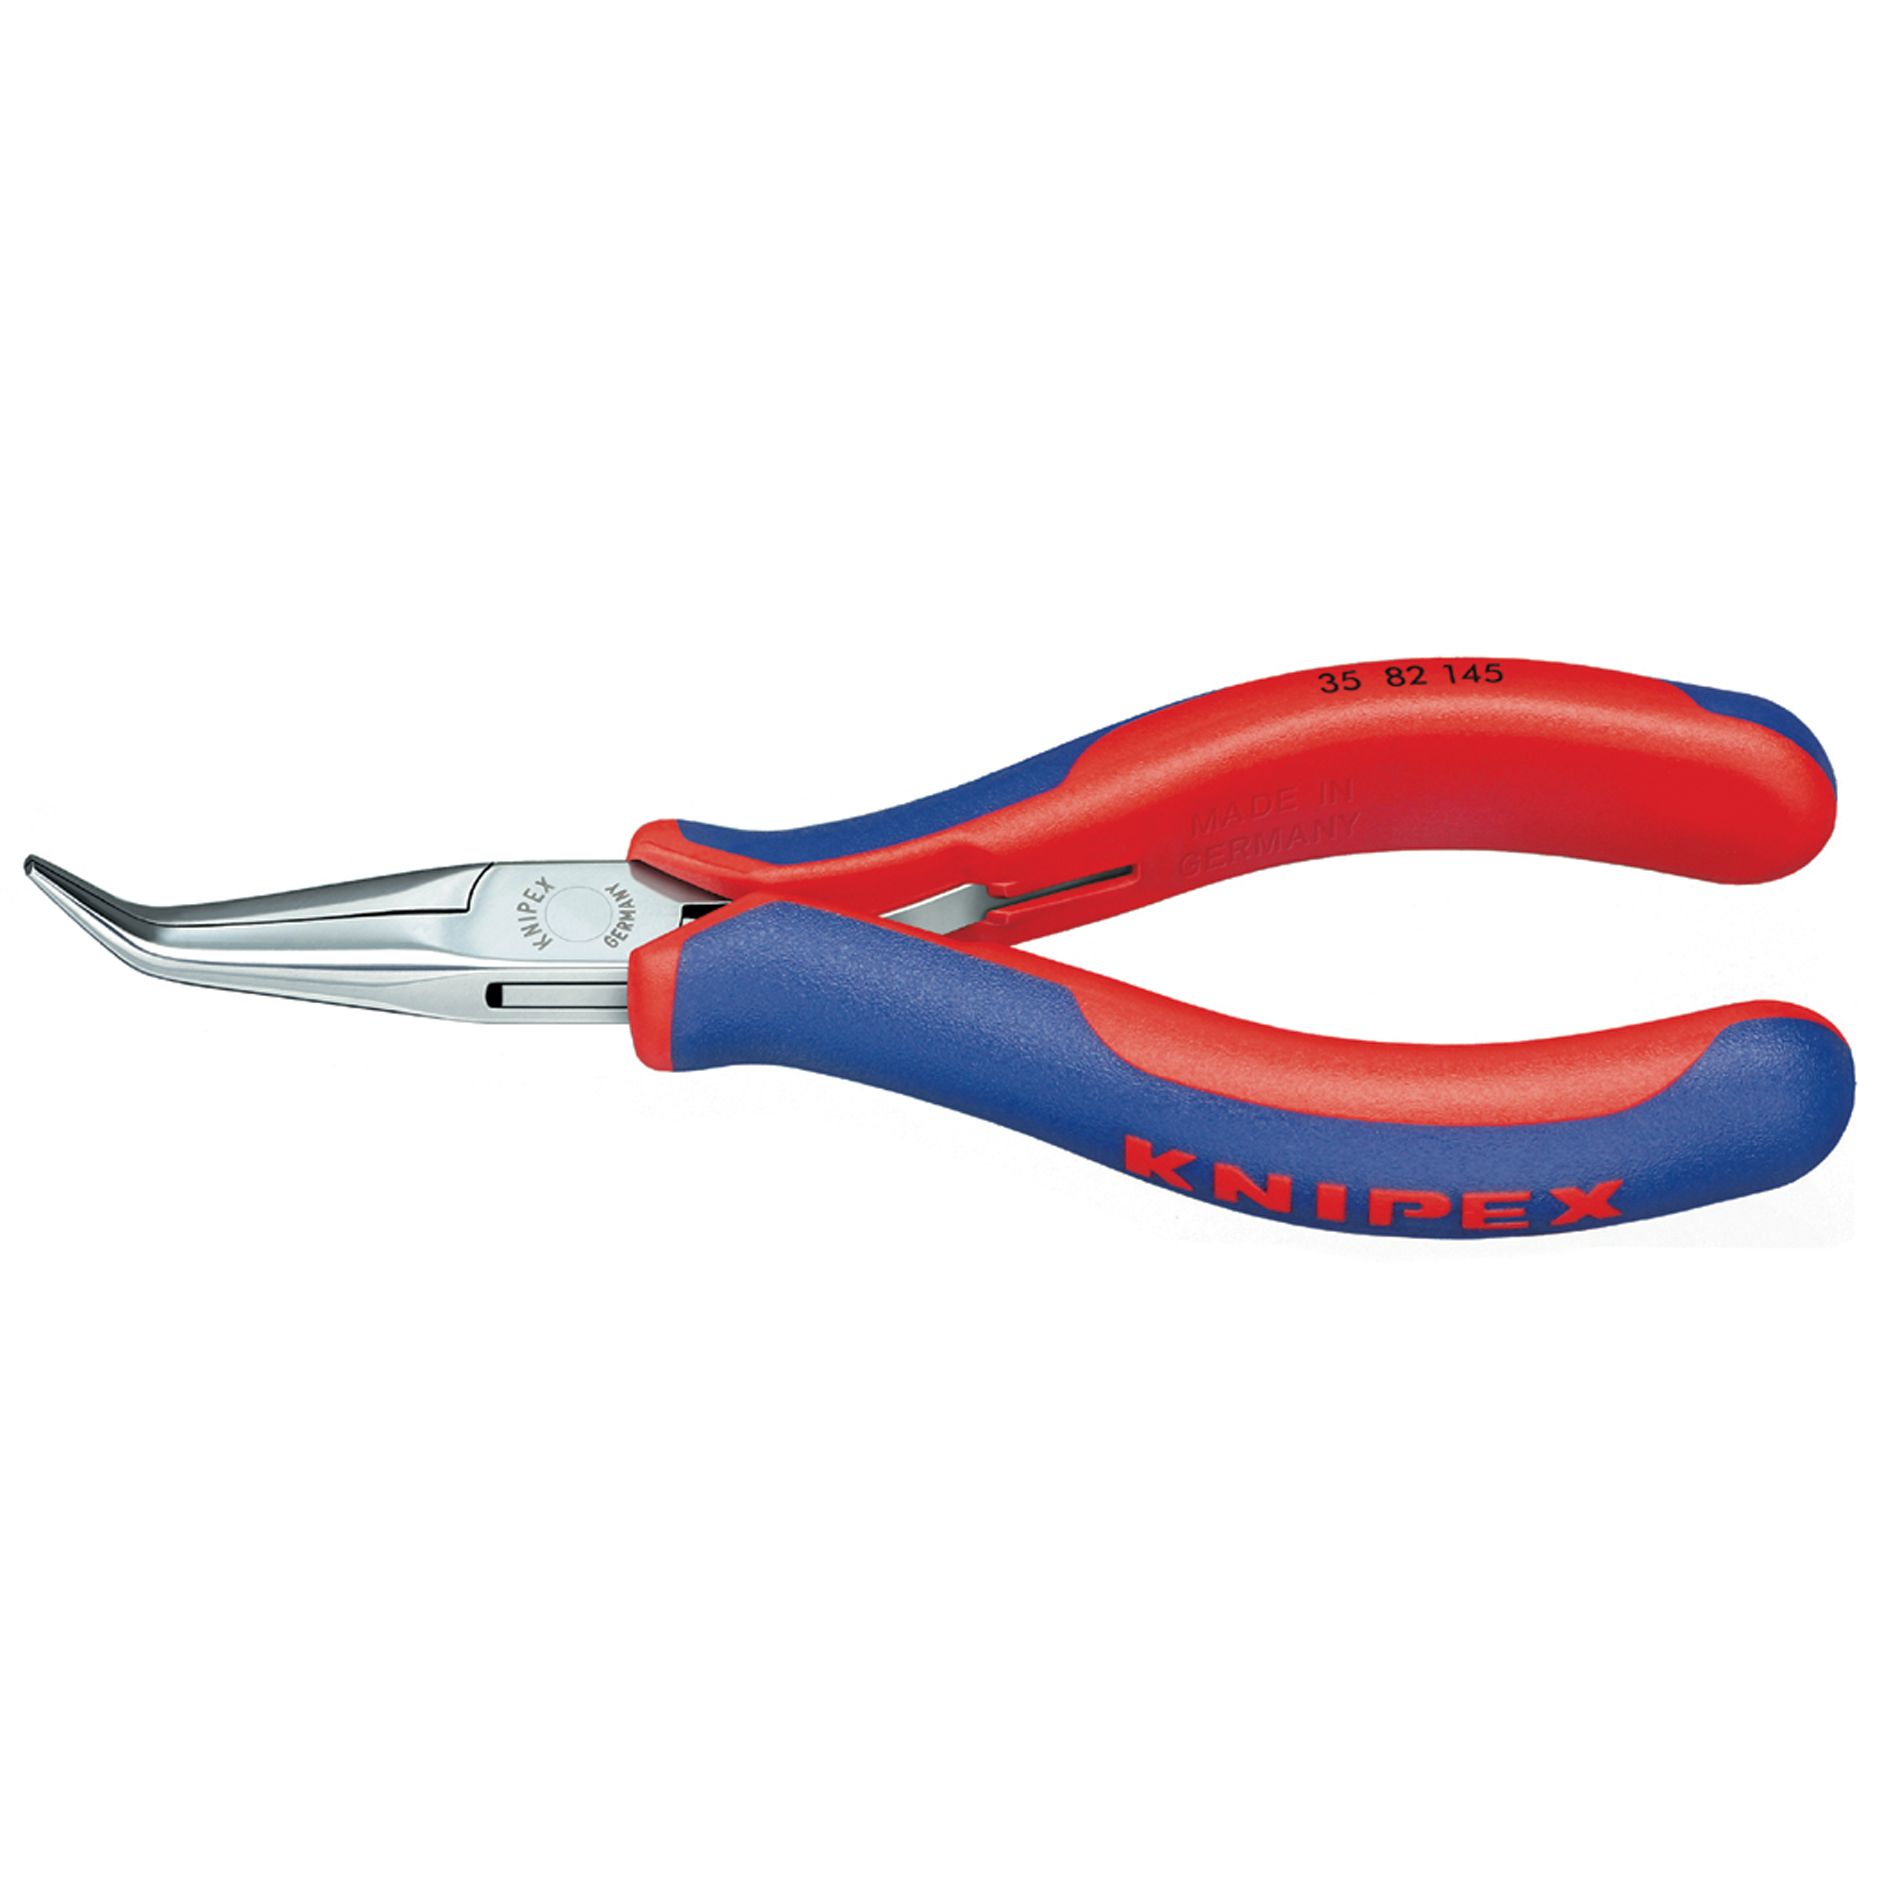 Knipex 5 3/4" Electronics Pliers - Angled Half Round Tips